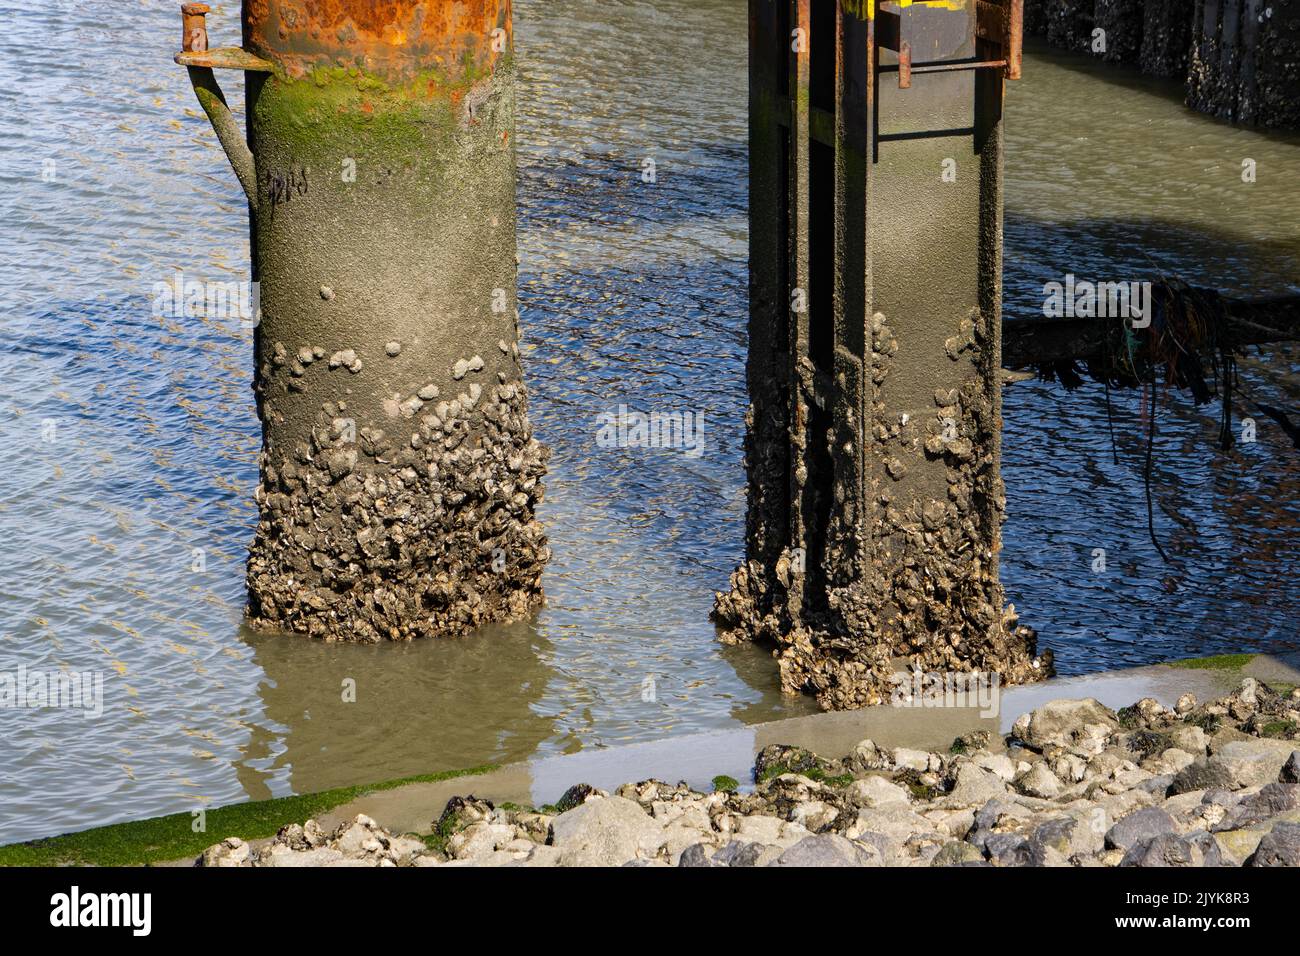 Metal pole in the water covered with oysters Stock Photo